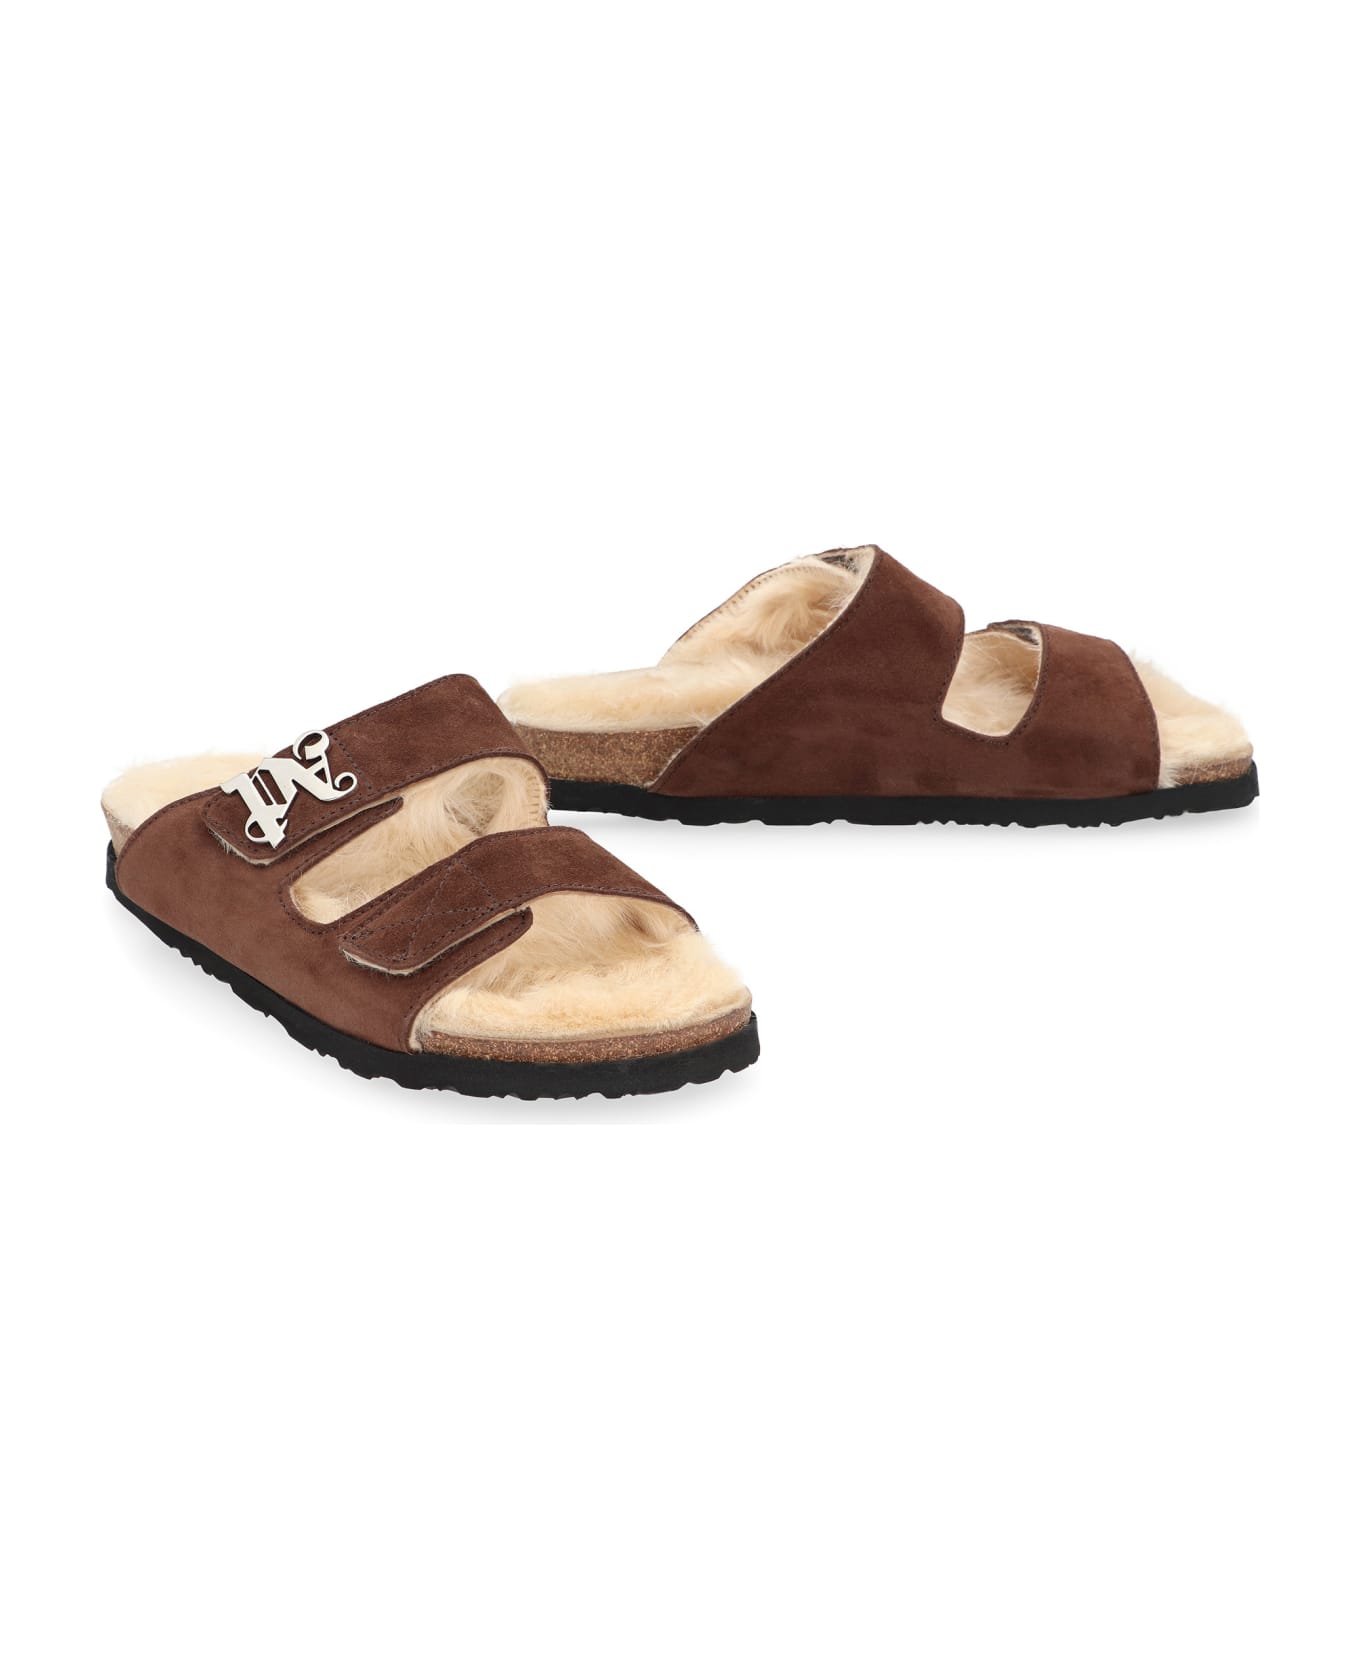 Palm Angels Suede Sandals - brown その他各種シューズ